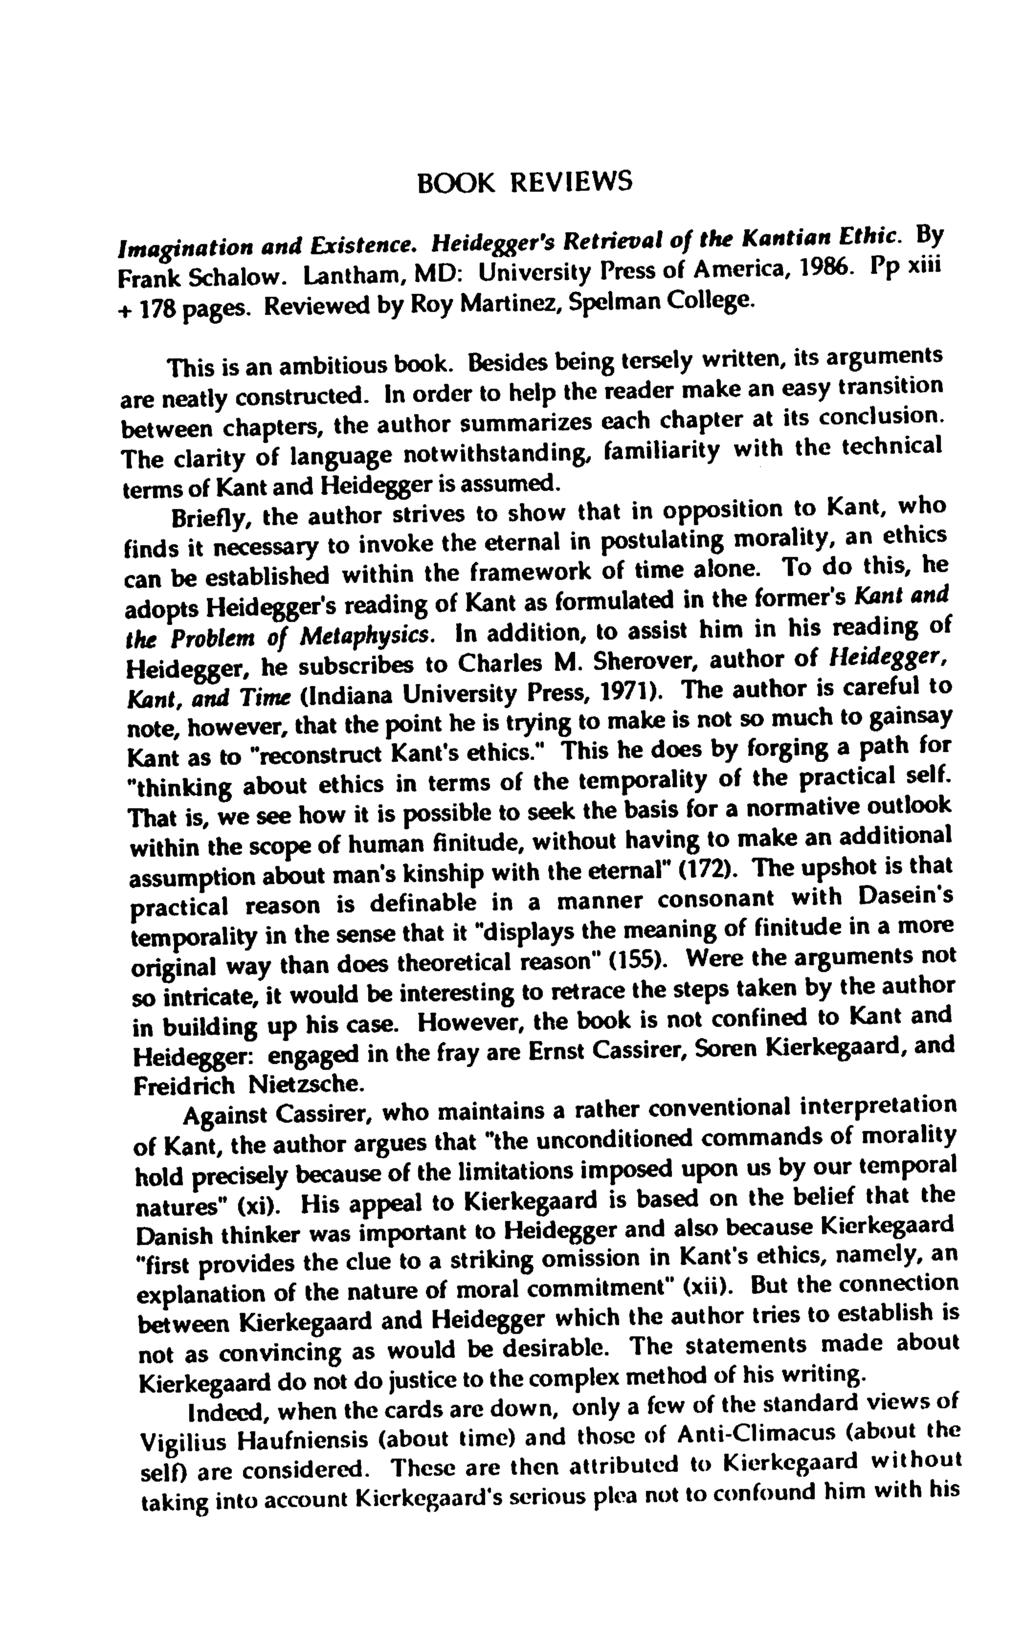 BOOK REVIEWS Imagination and Existence. Heidegger's Retrieval of the Kantian Ethic. By Frank Schalow. Lantham, MD: University Press of America, 1986. Pp xiii + 178 pages.